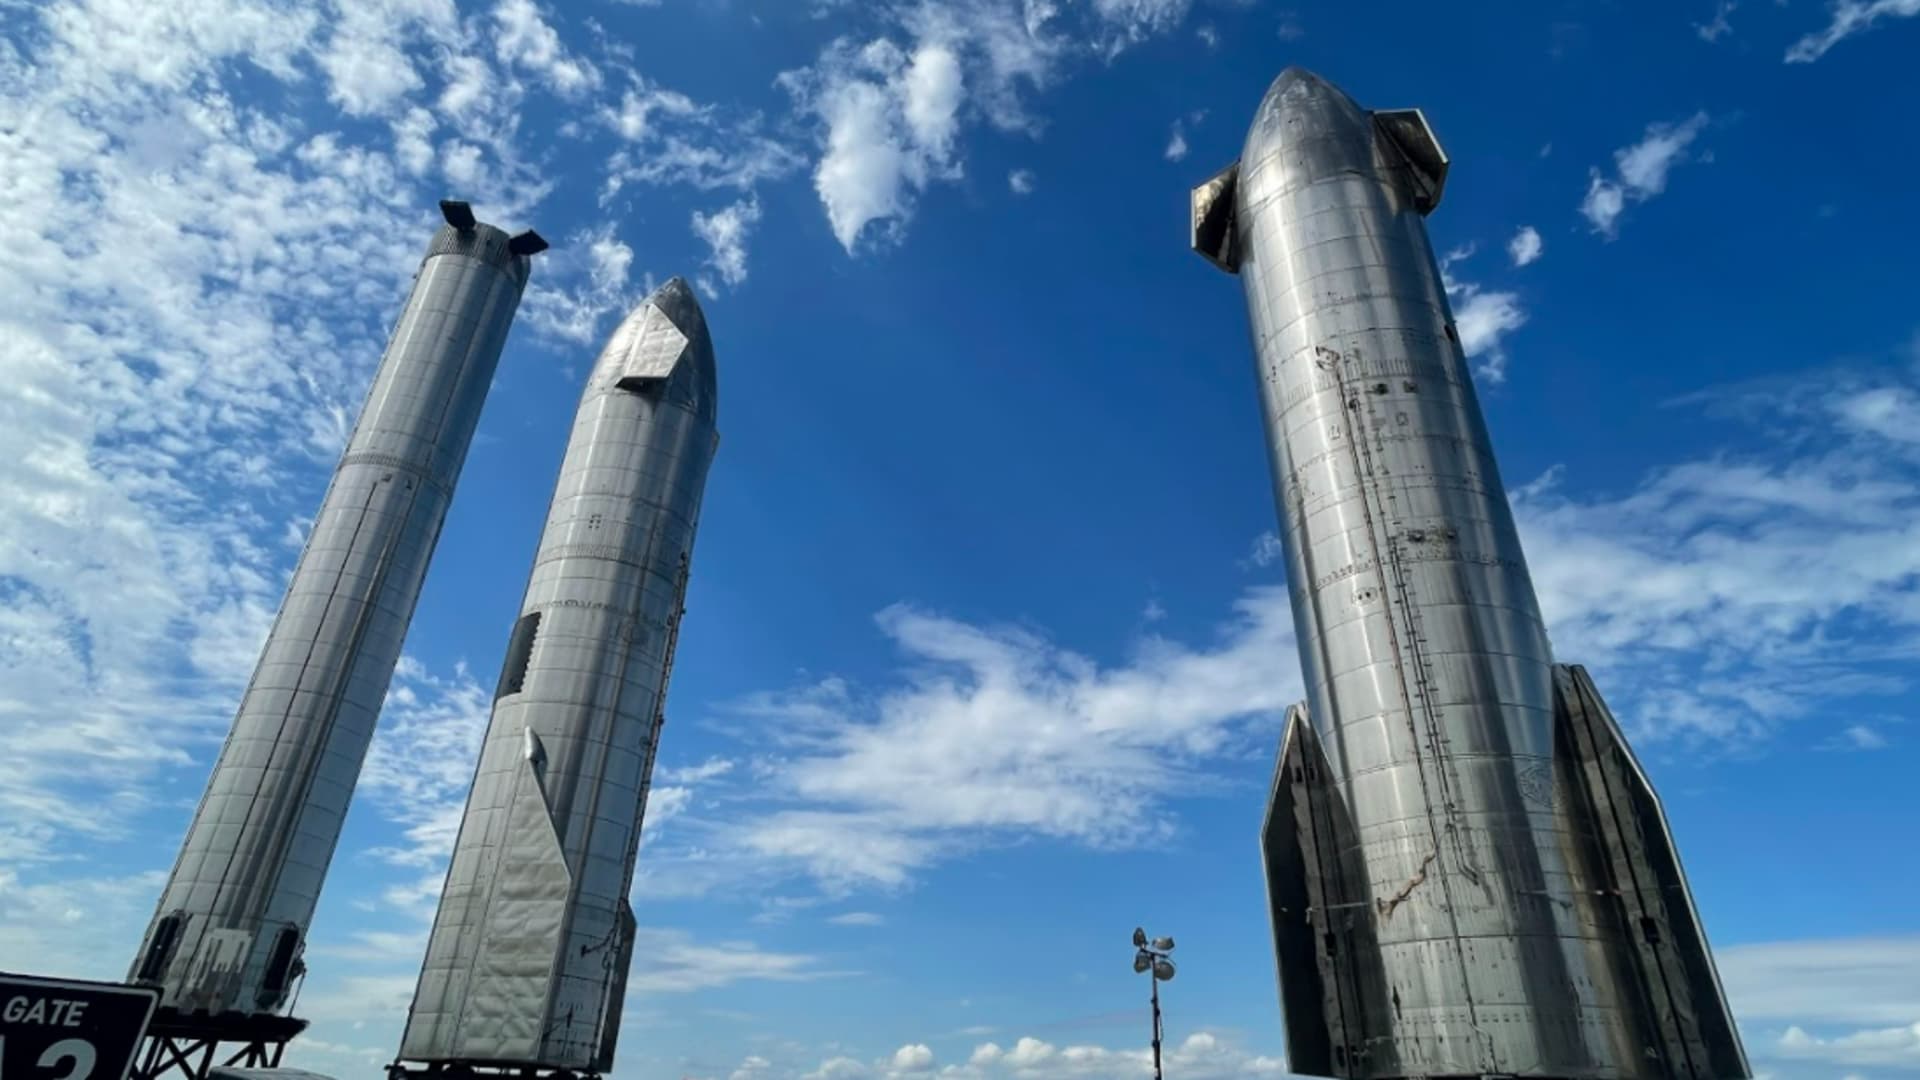 Prototypes of SpaceX's Starship rocket and Super Heavy booster stand at the company's Starbase facility in Texas.